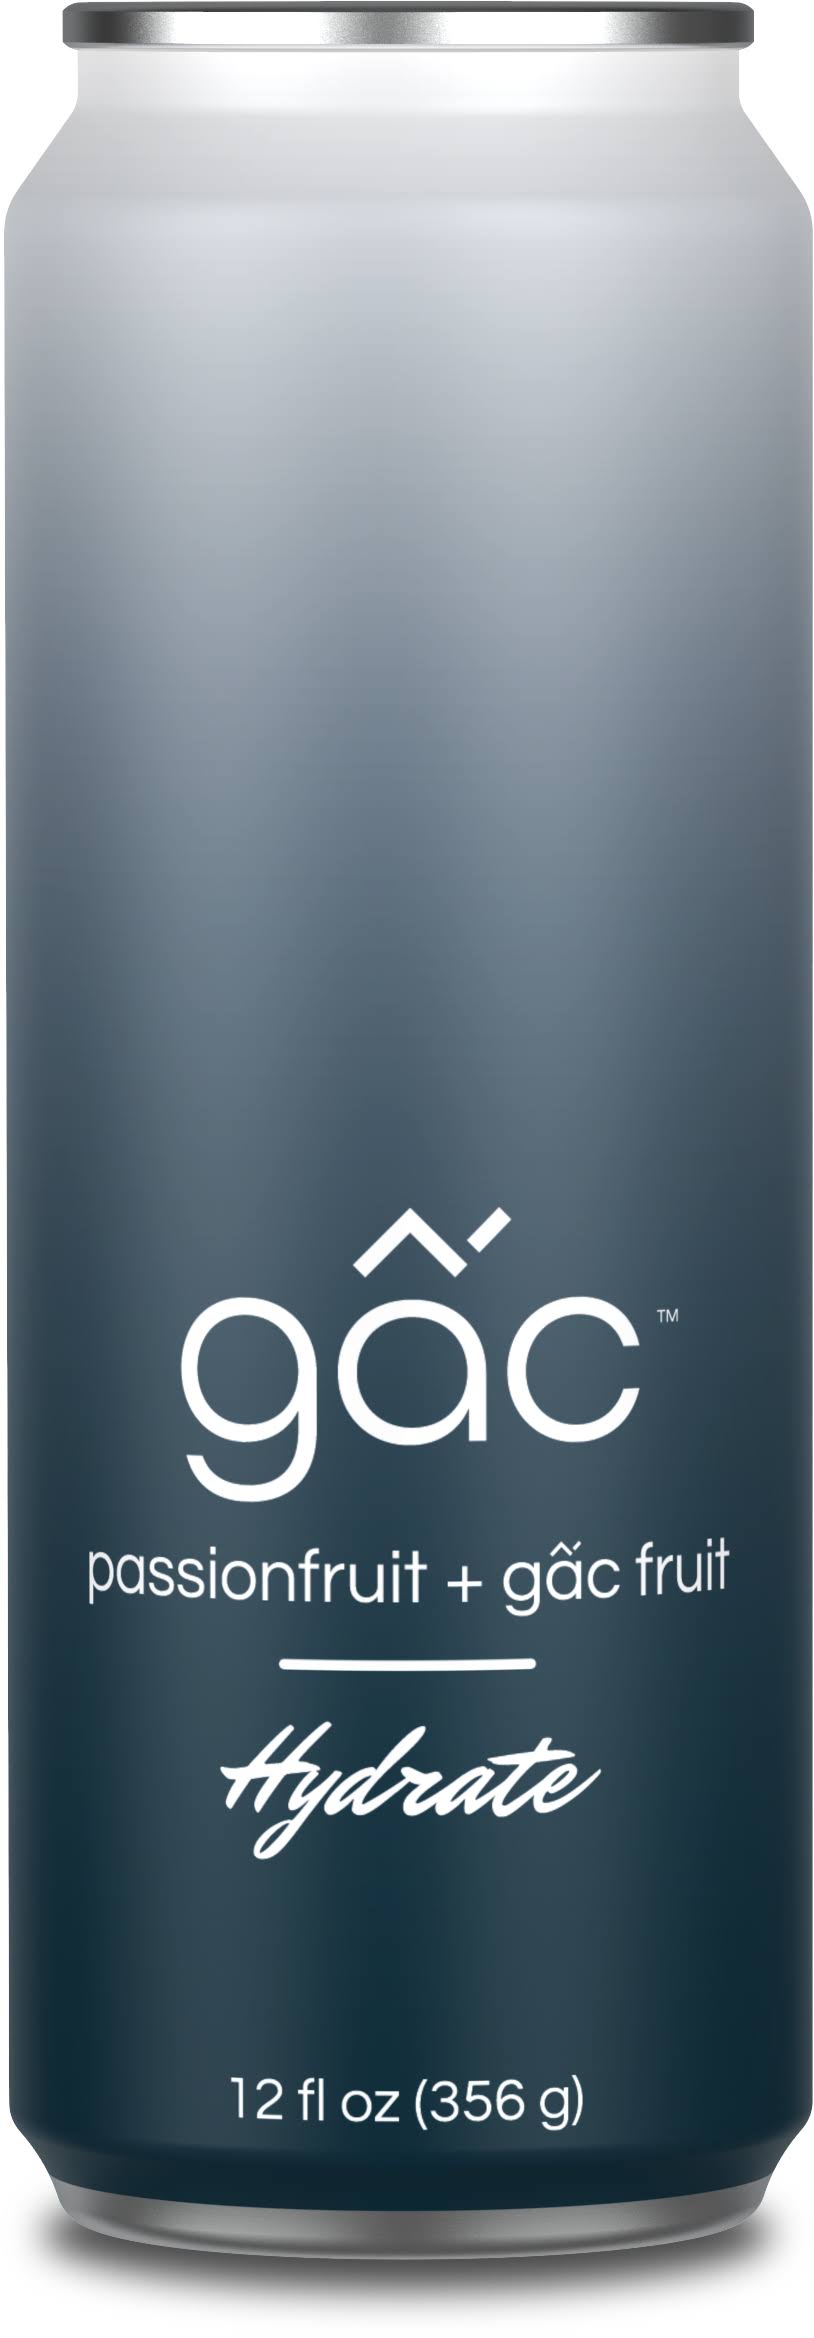 GAC Hydrate Passionfruit All Natural Drinkable